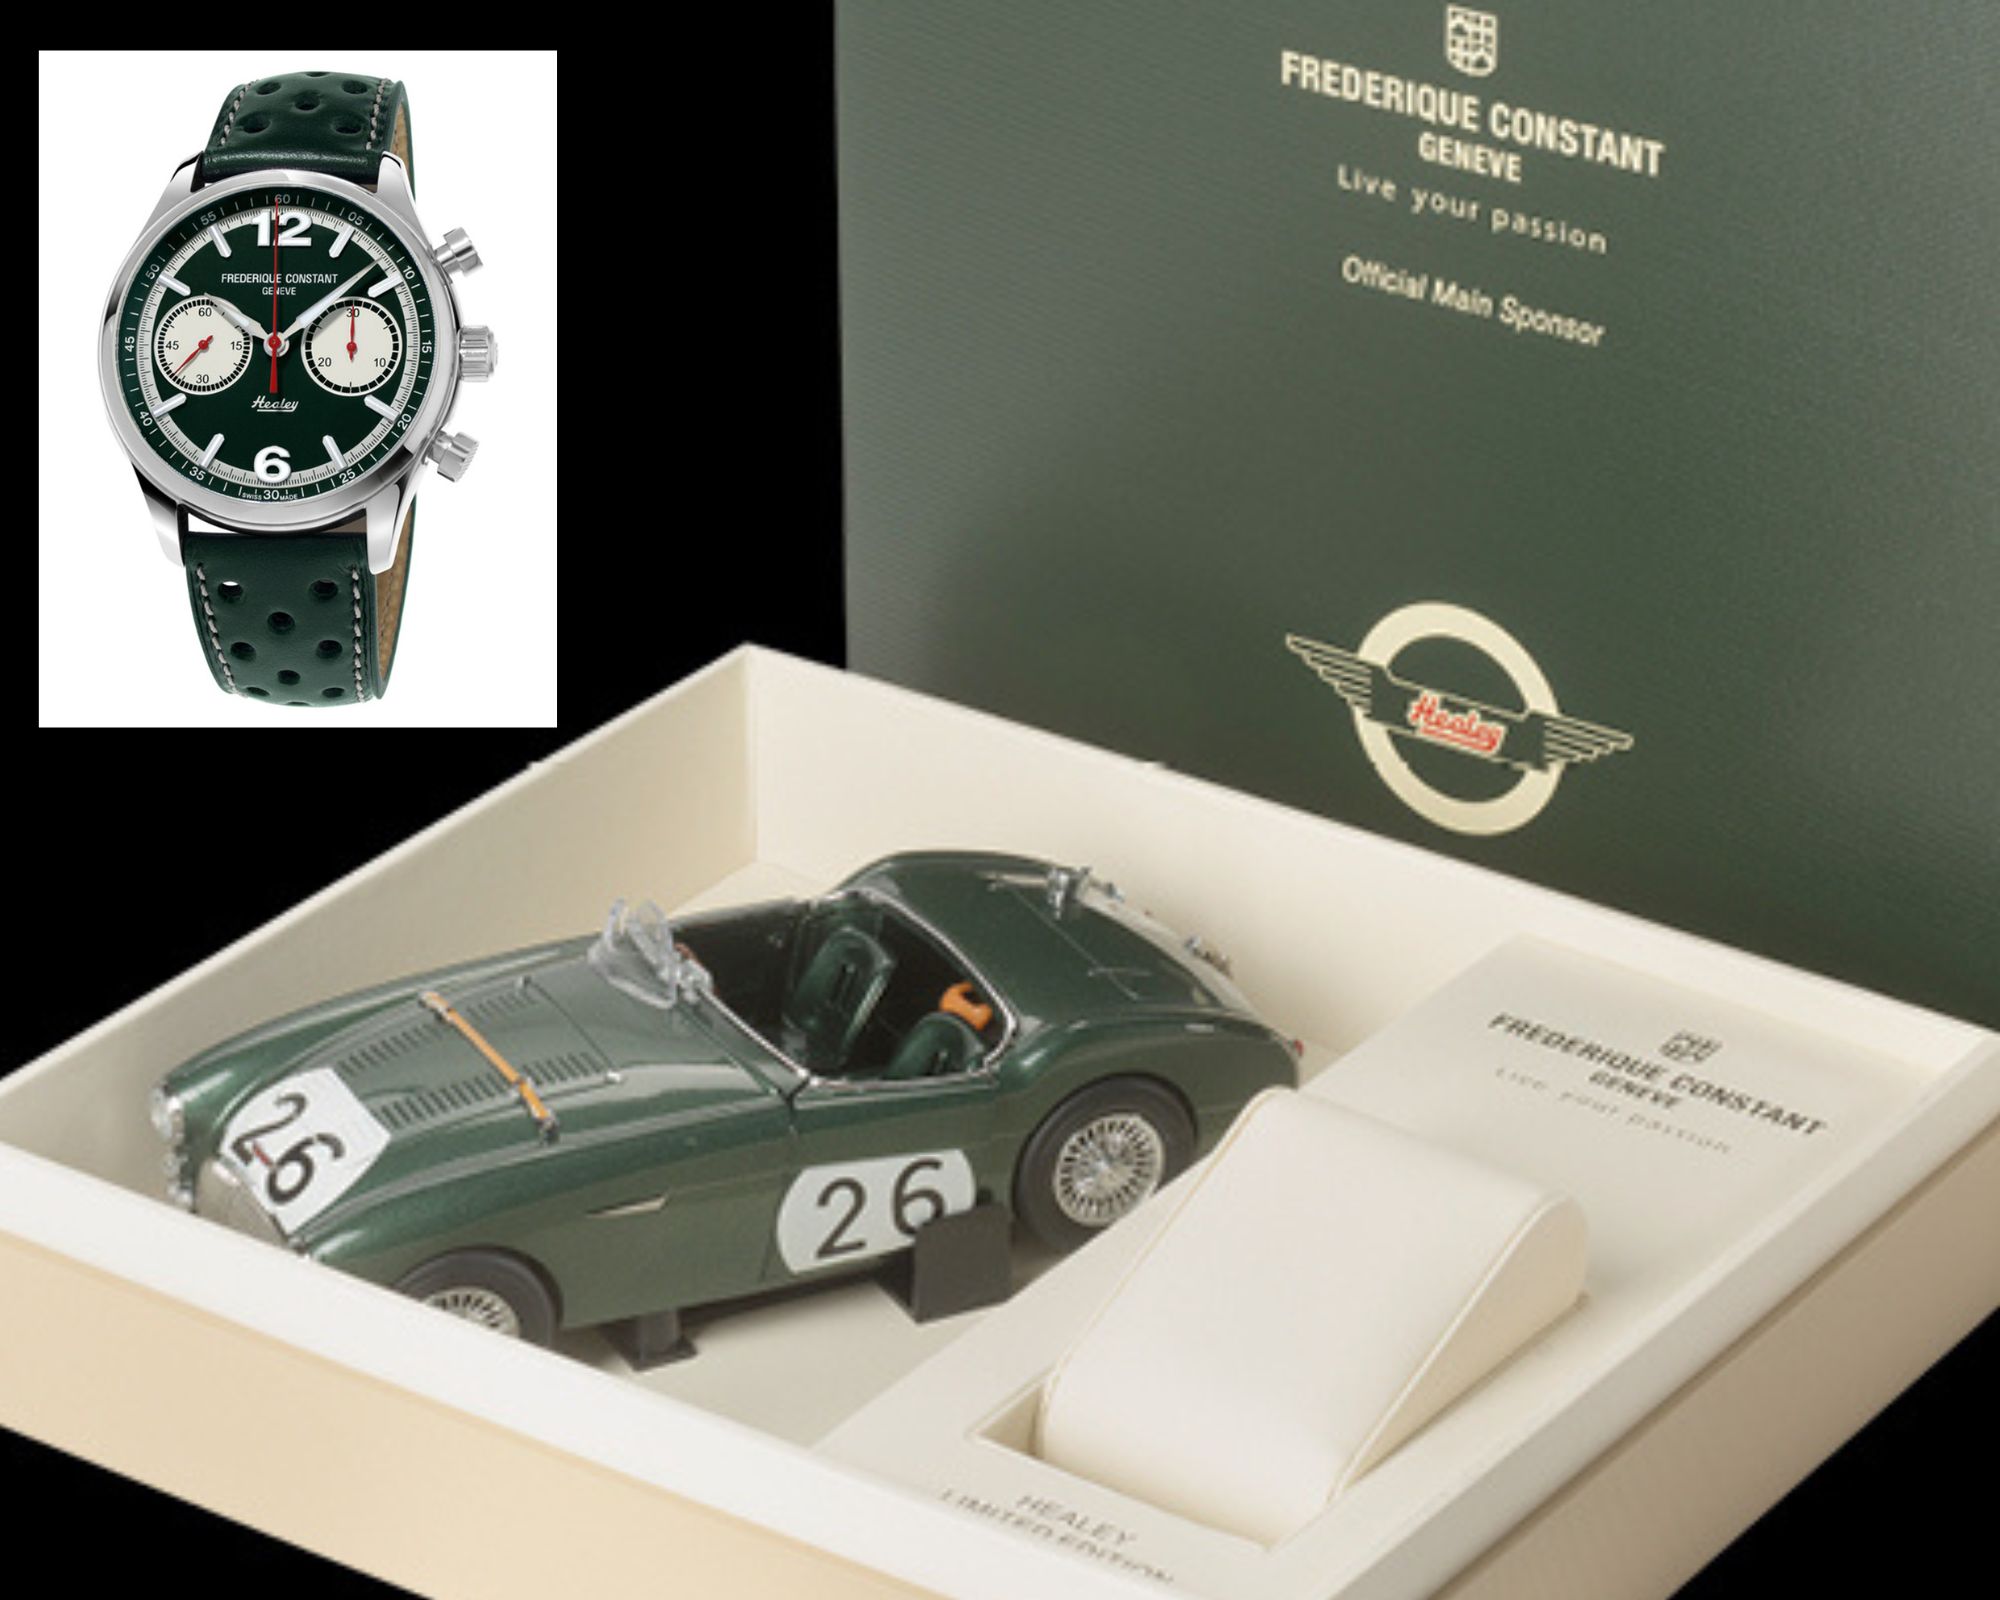 Vintage Rally Healy Frederique Constant Watch